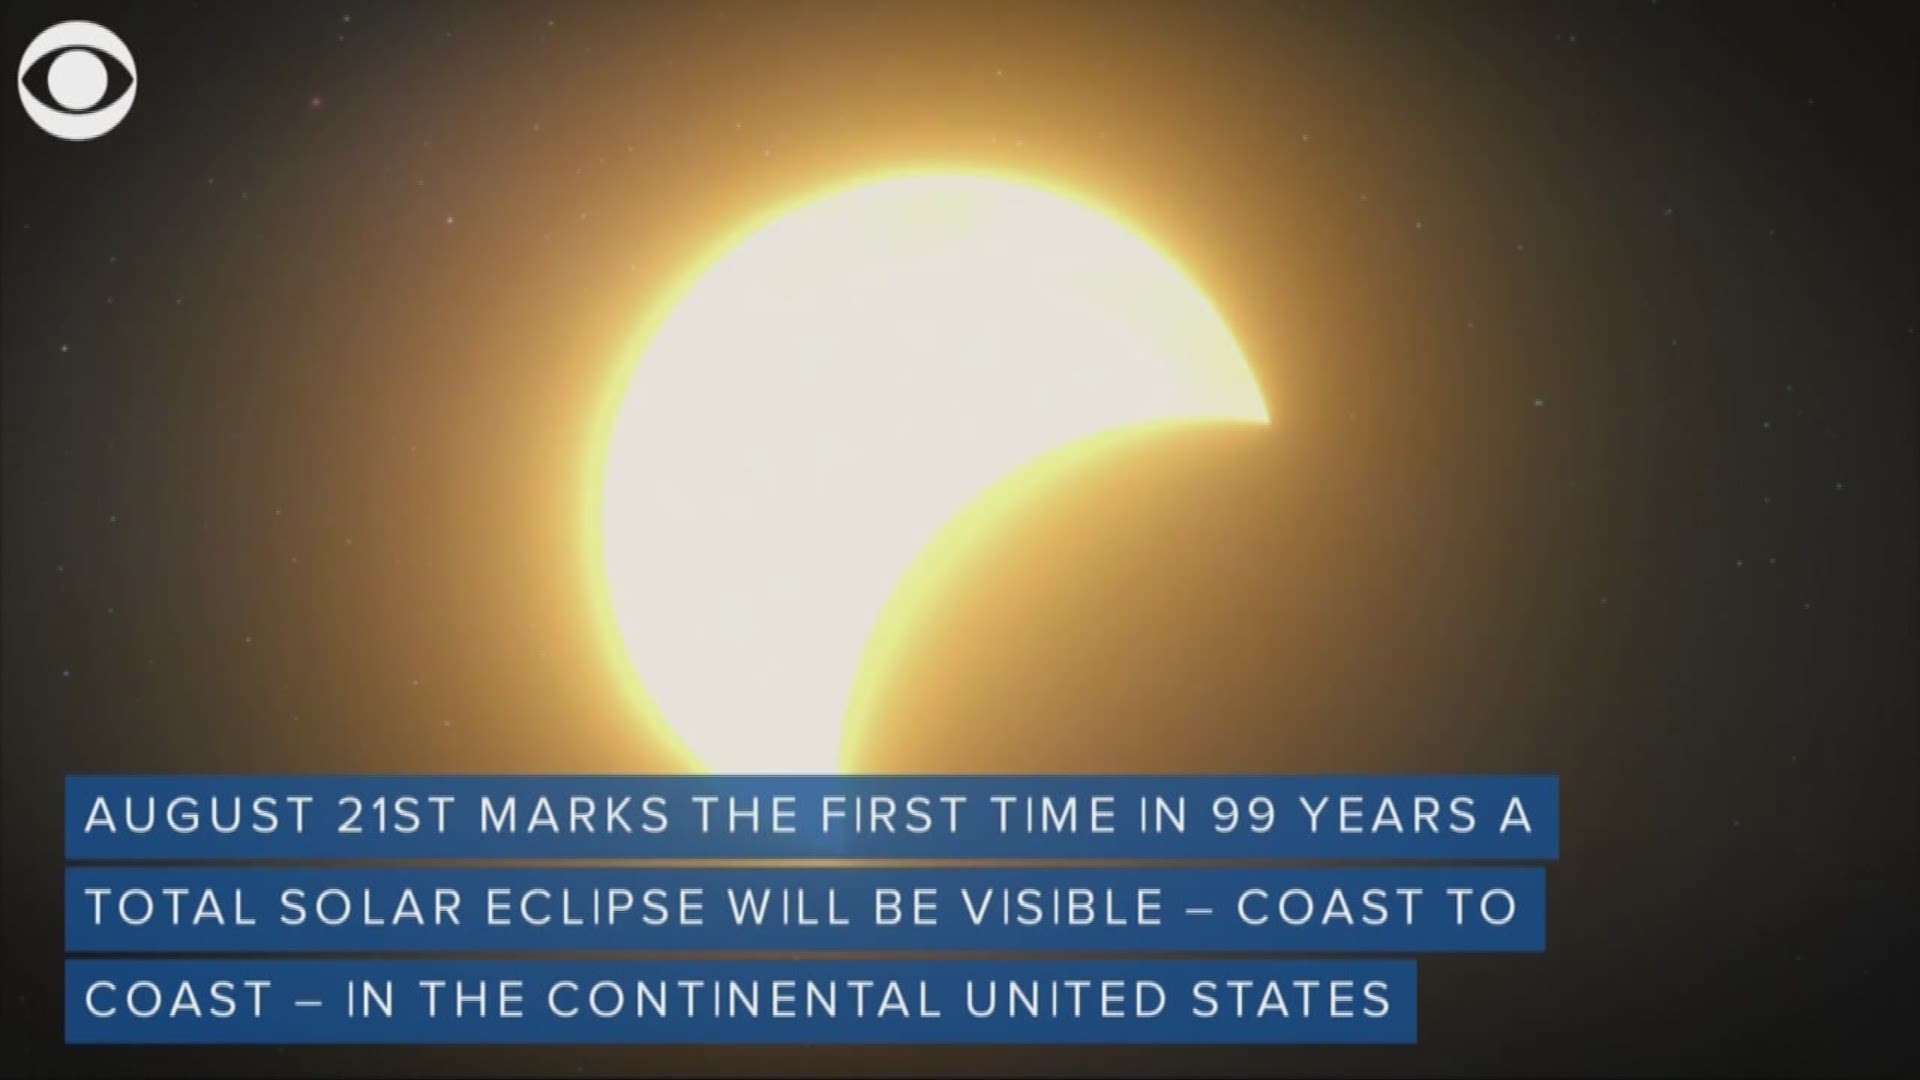 THV11's Dawn Scott verified the 3 most common questions surrounding the solar eclipse. UA-Little Rock Assoc. Professor of Astronomy, Tony Hall was our verify source.